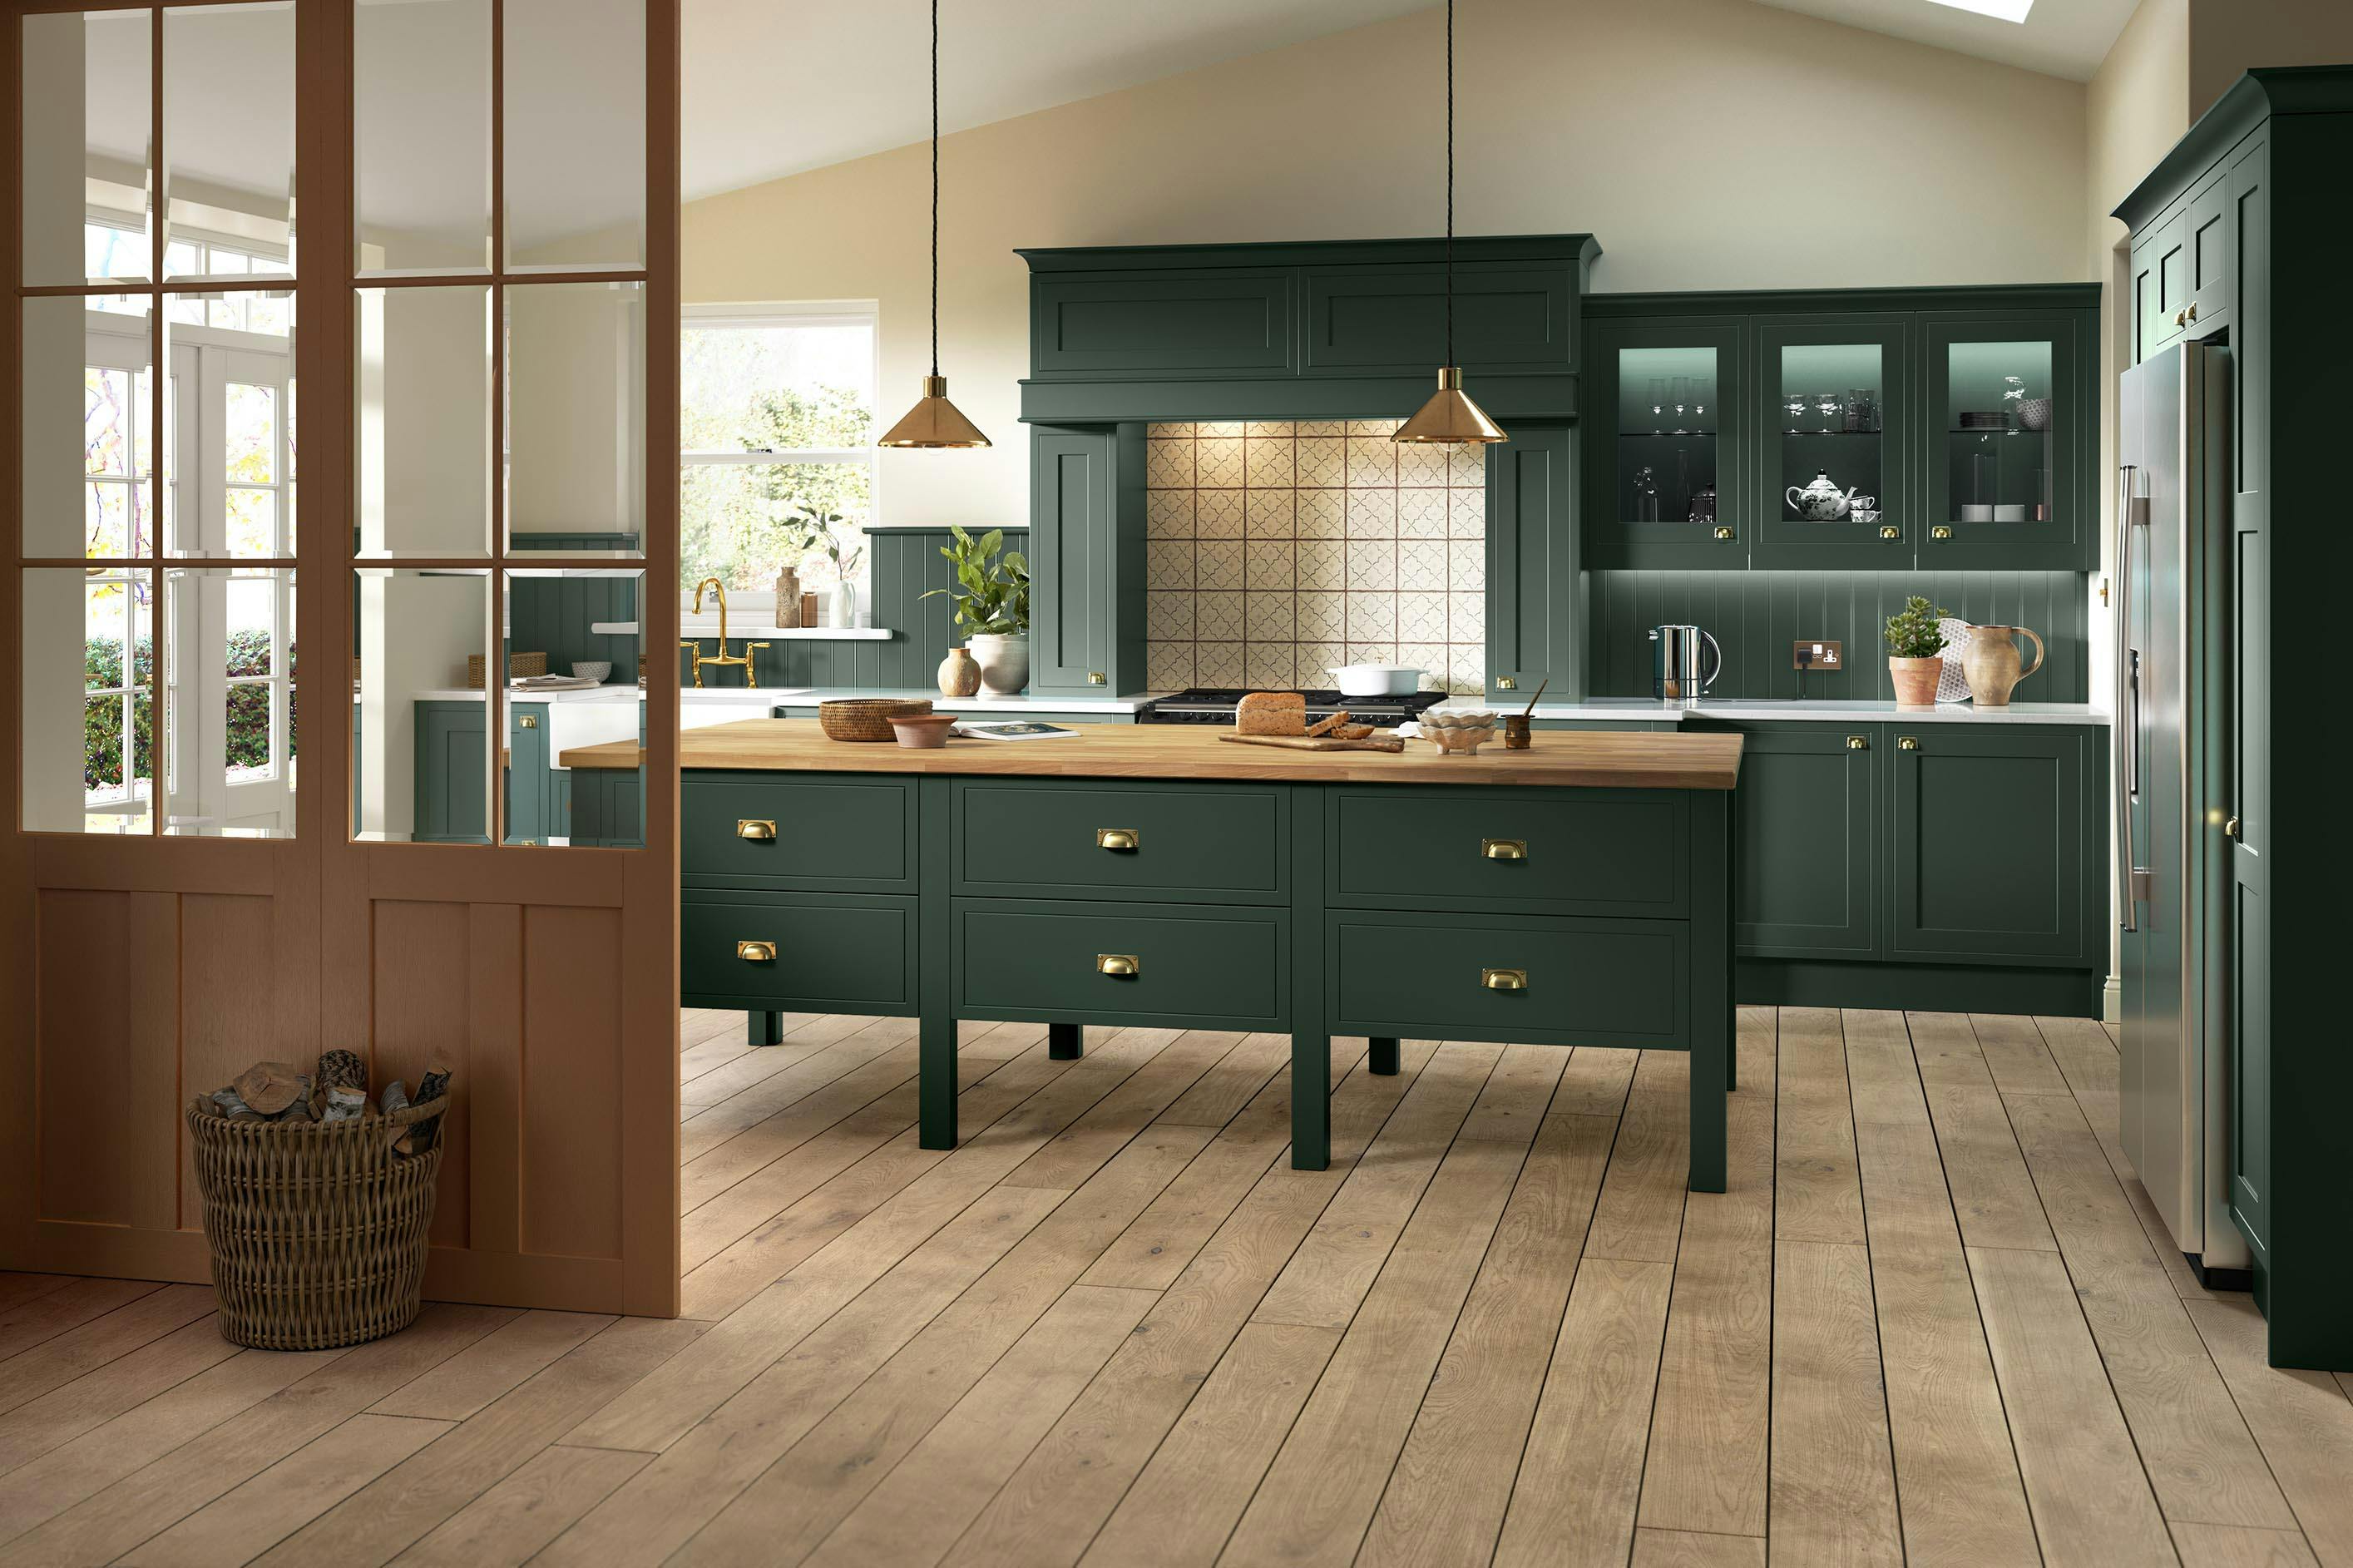 How to choose the right kitchen colour